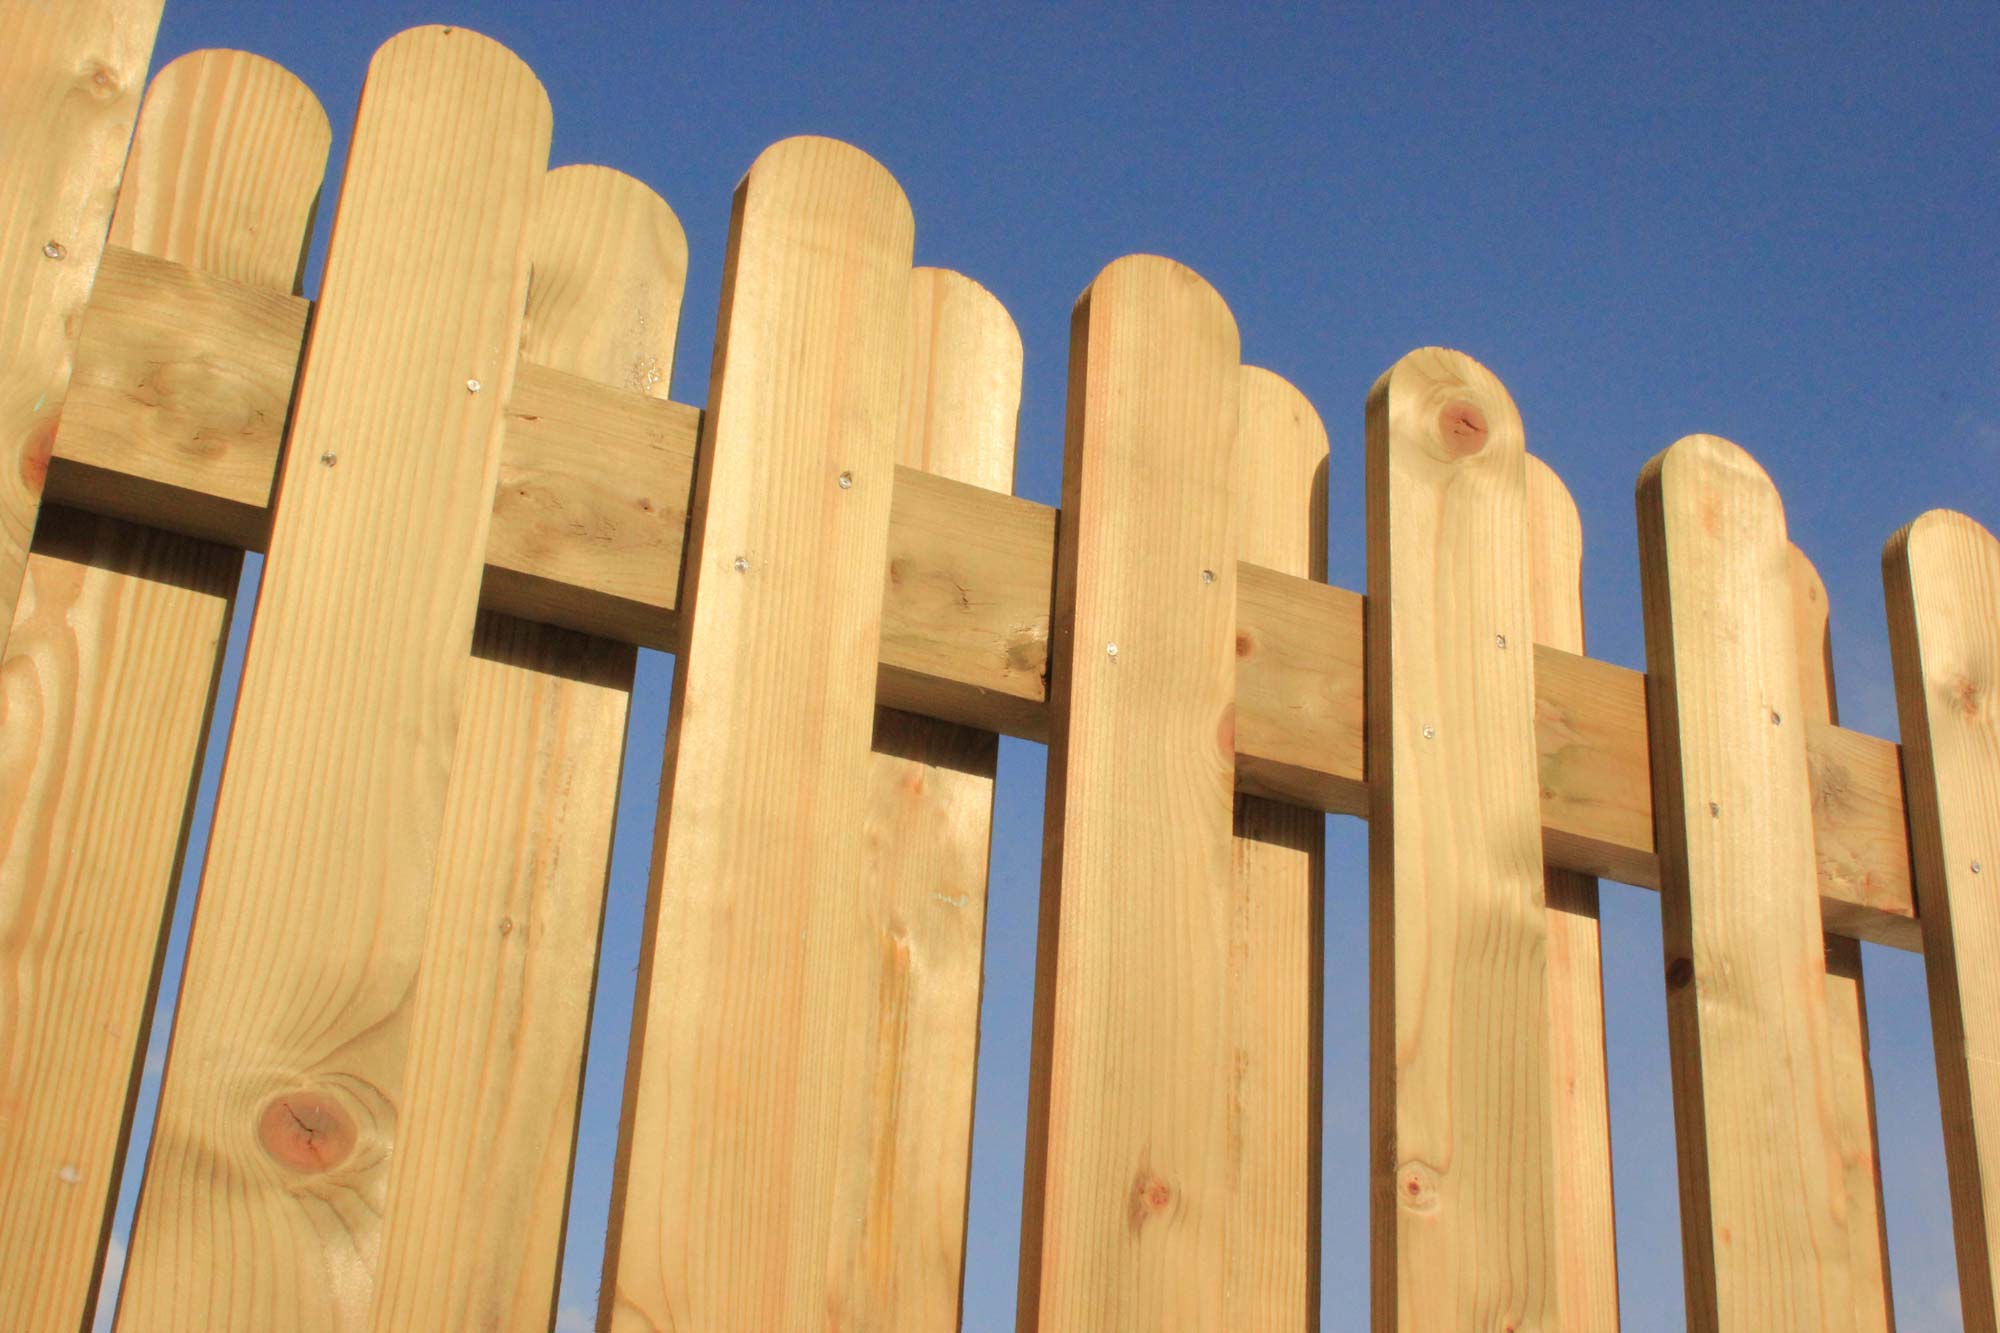 Palisade fence with alternating pales